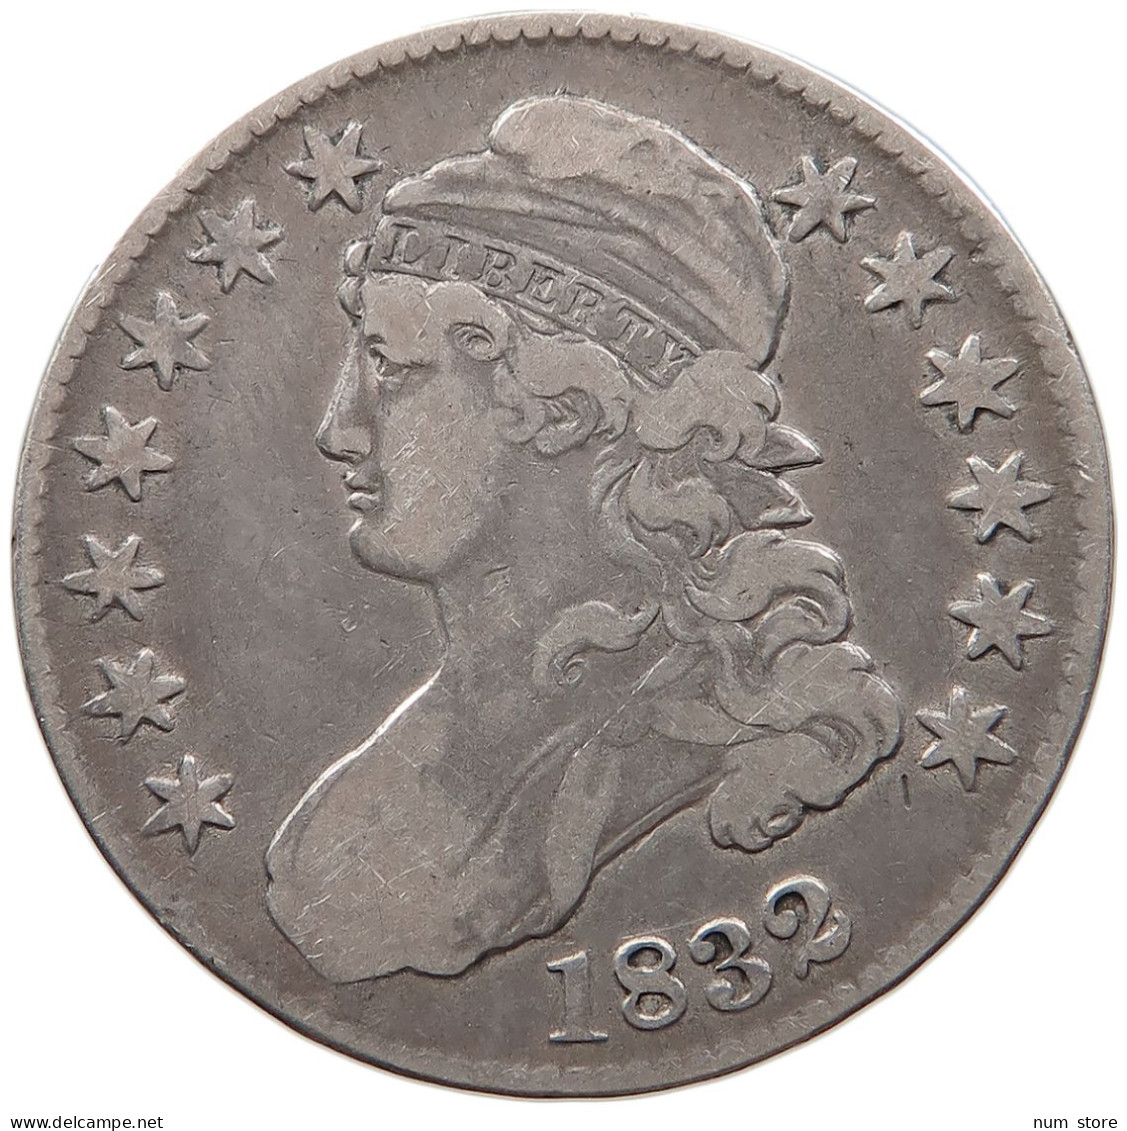 UNITED STATES OF AMERICA HALF DOLLAR 1832 CAPPED BUST #t141 0421 - 1794-1839: Early Halves (Prémices)